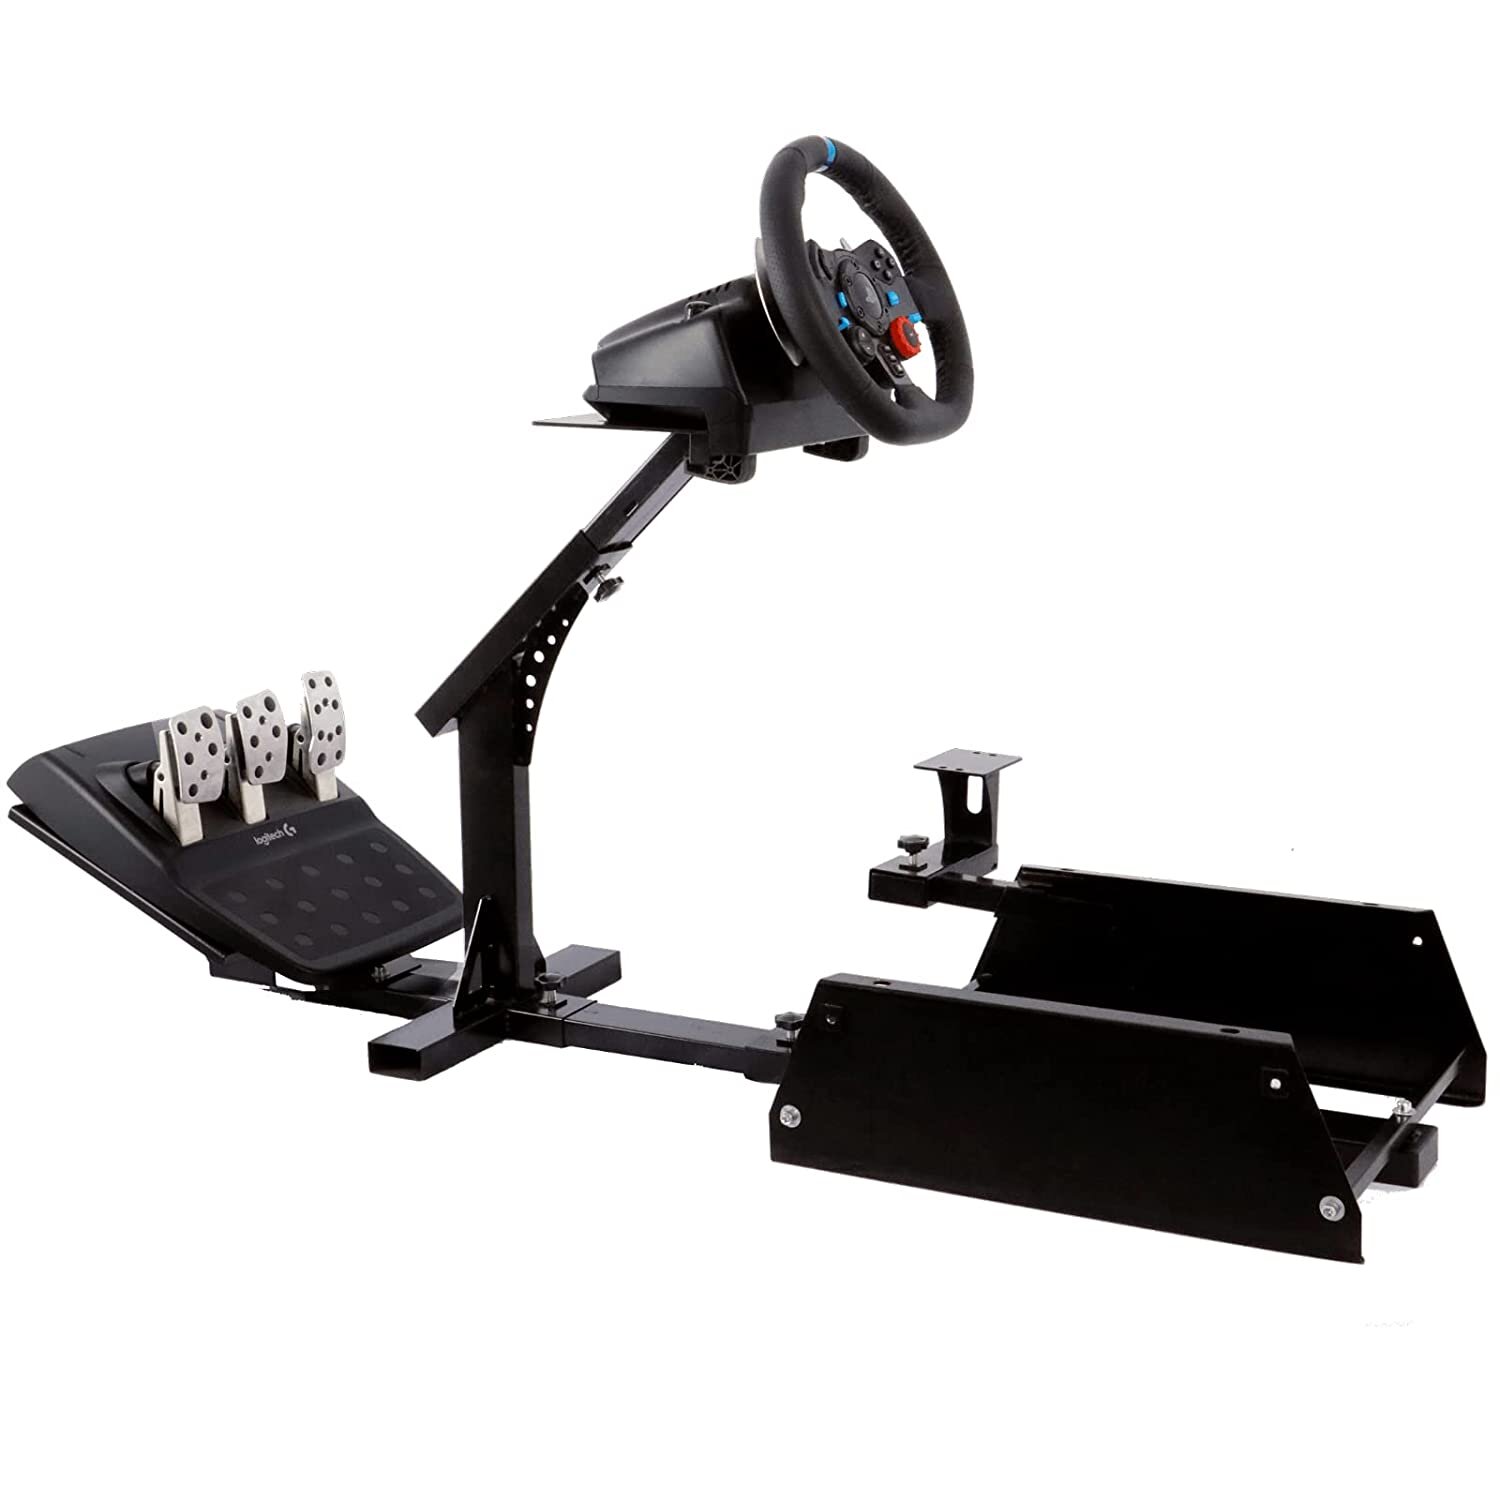 Anman Racing Steering Wheel Stand fit Logitech Thrustmaster NO Wheel  Shifter Pedals